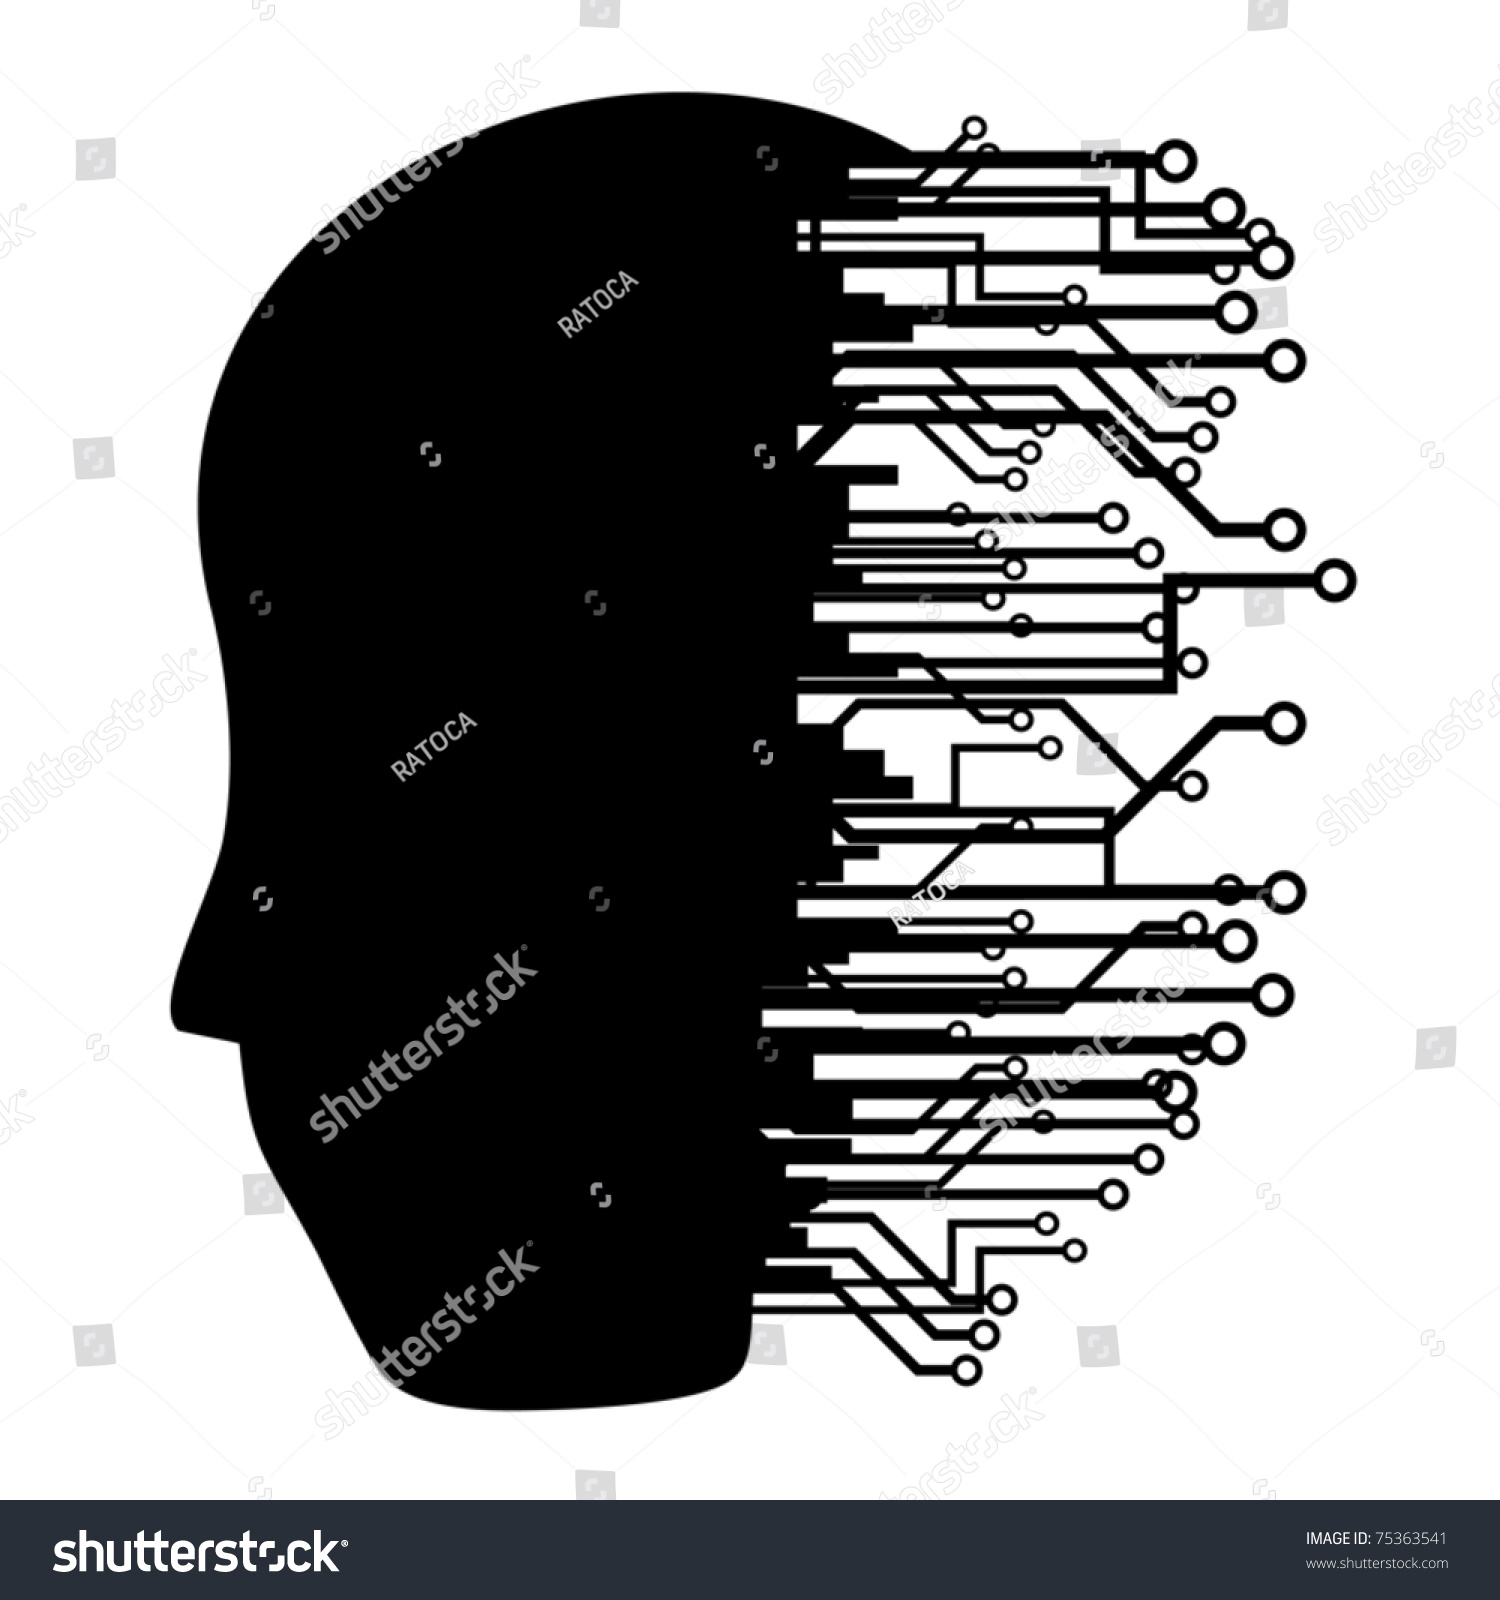 clipart of human heads - photo #49